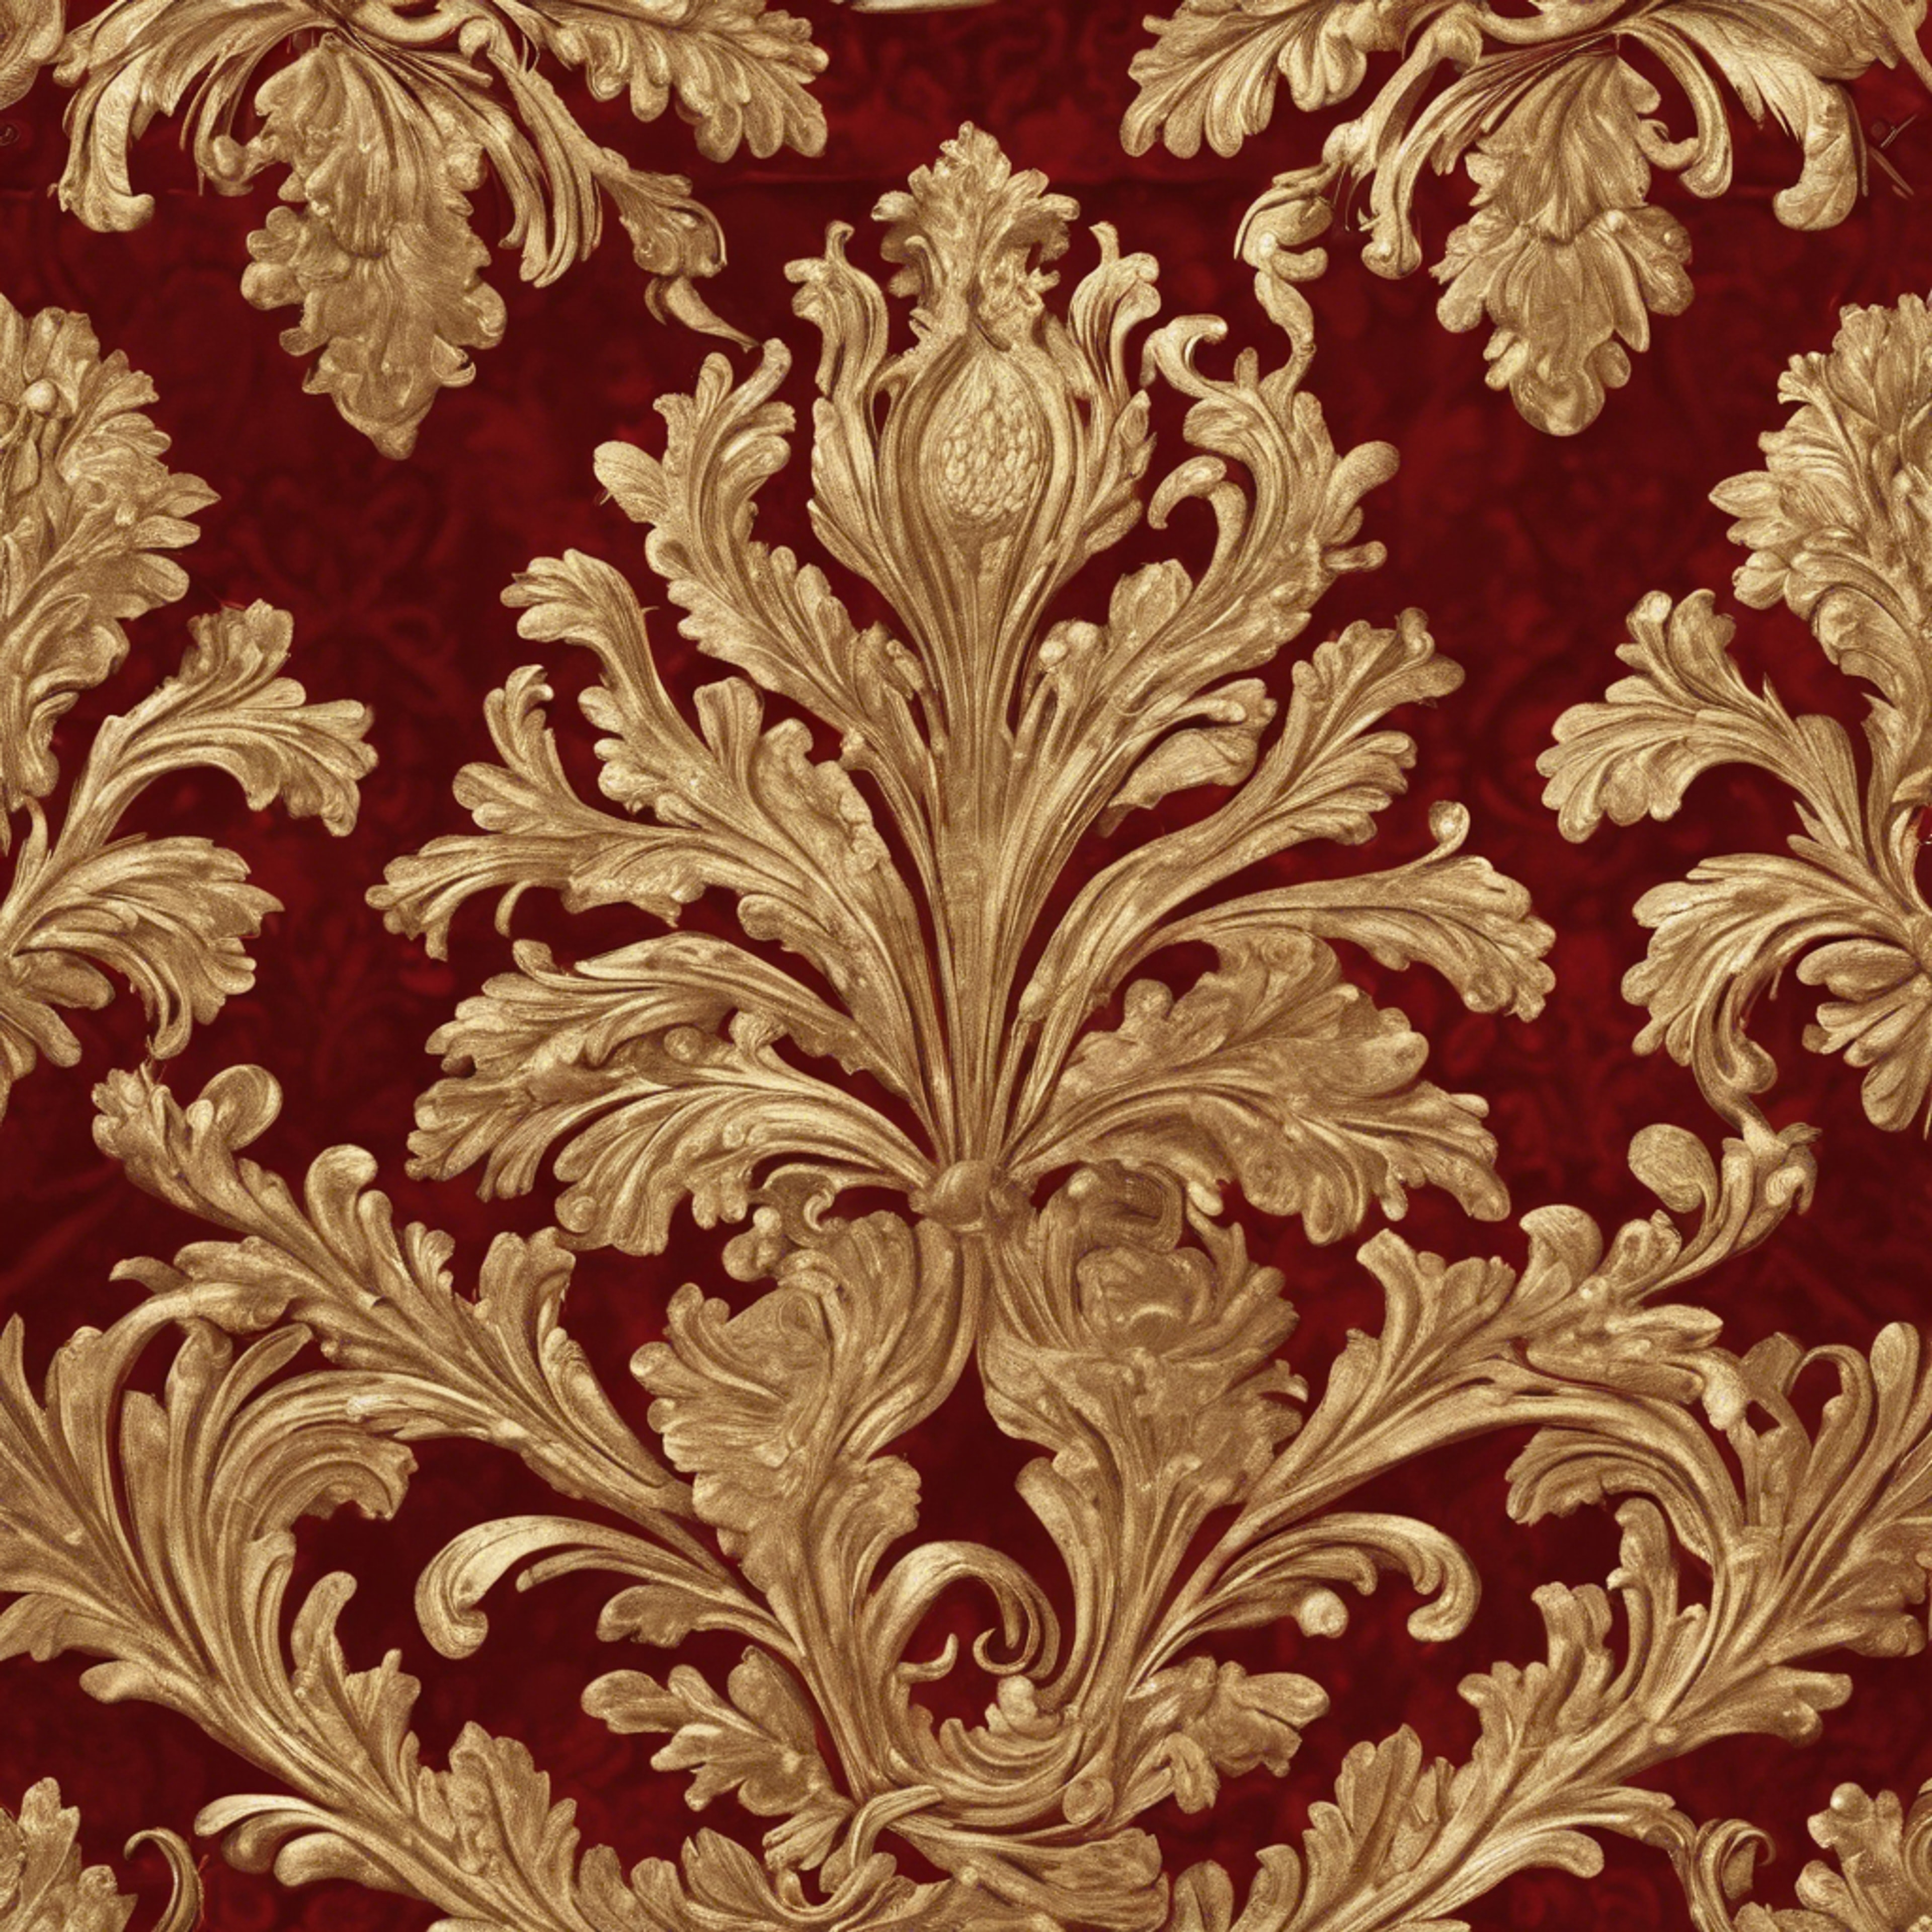 A dramatic seamless design of antique gold damask on a canvas of cardinal red velvet. Валлпапер[ac0bd922427a4985975e]